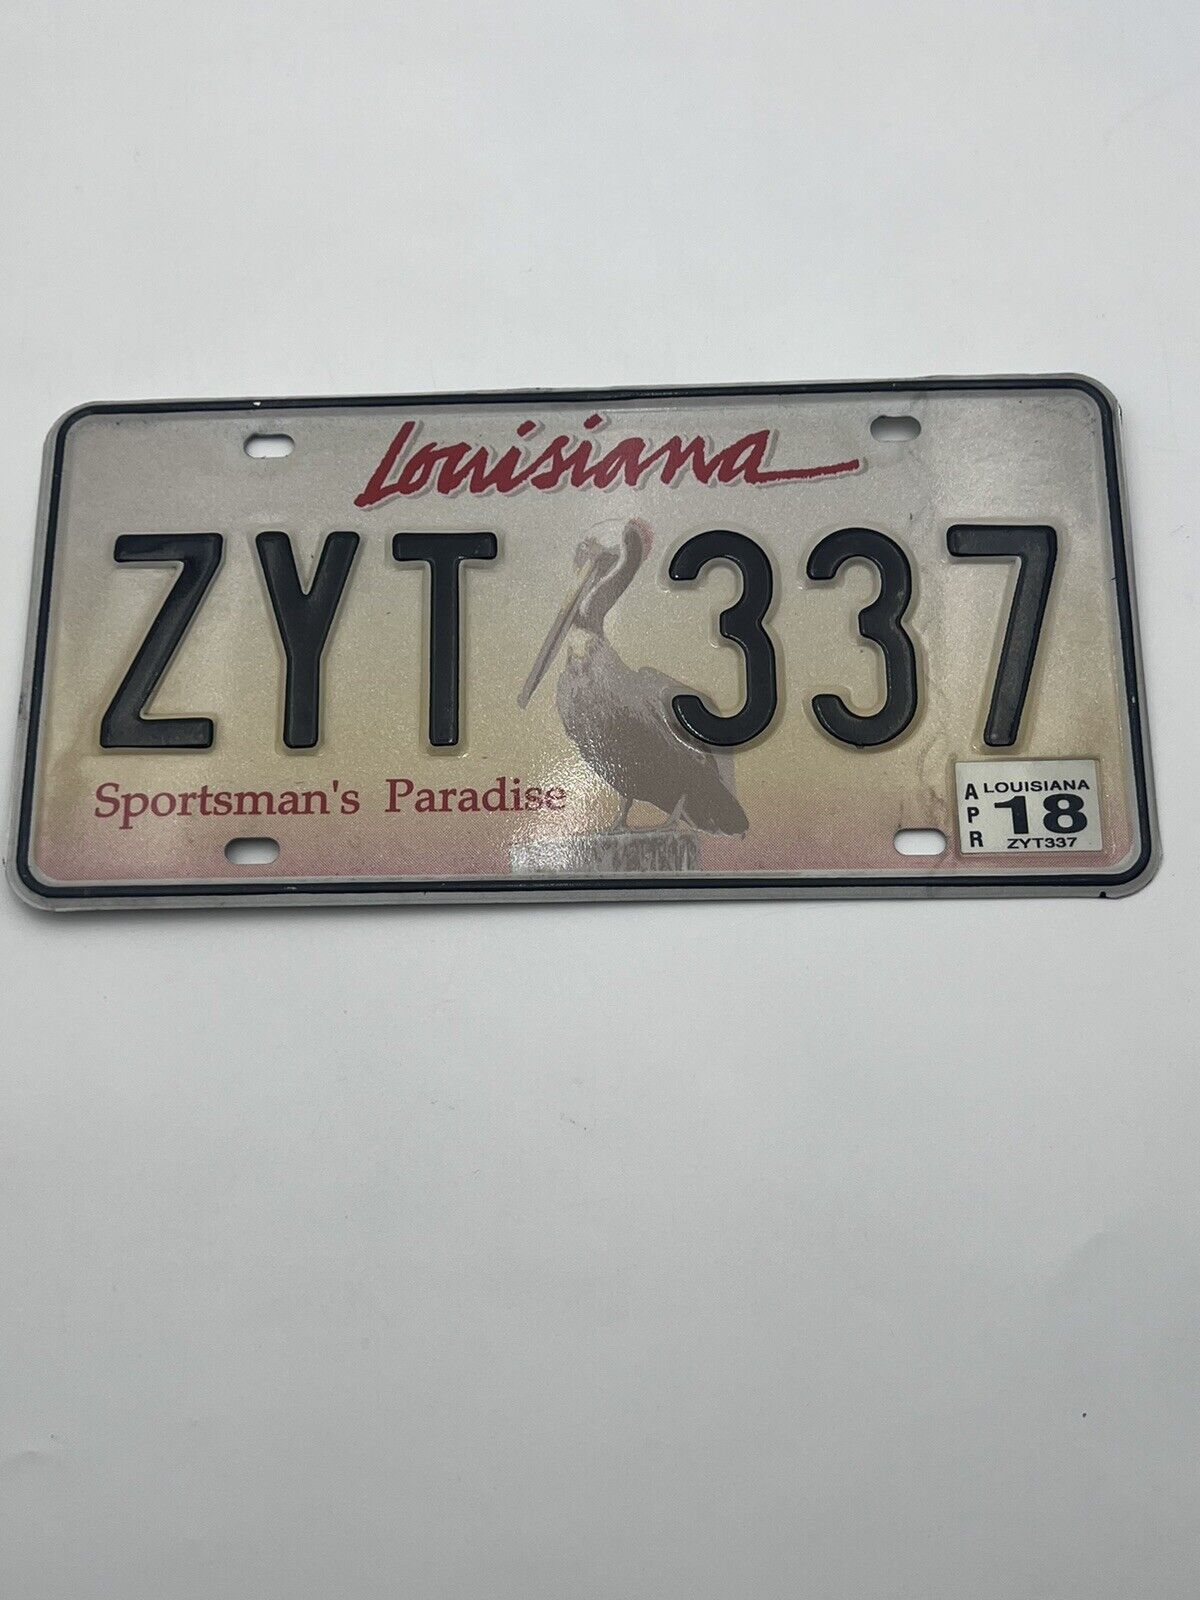 2018 LOUISIANA LICENSE PLATE PELICAN/SPORTSMAN’S PARADISE Expired ZYT 337